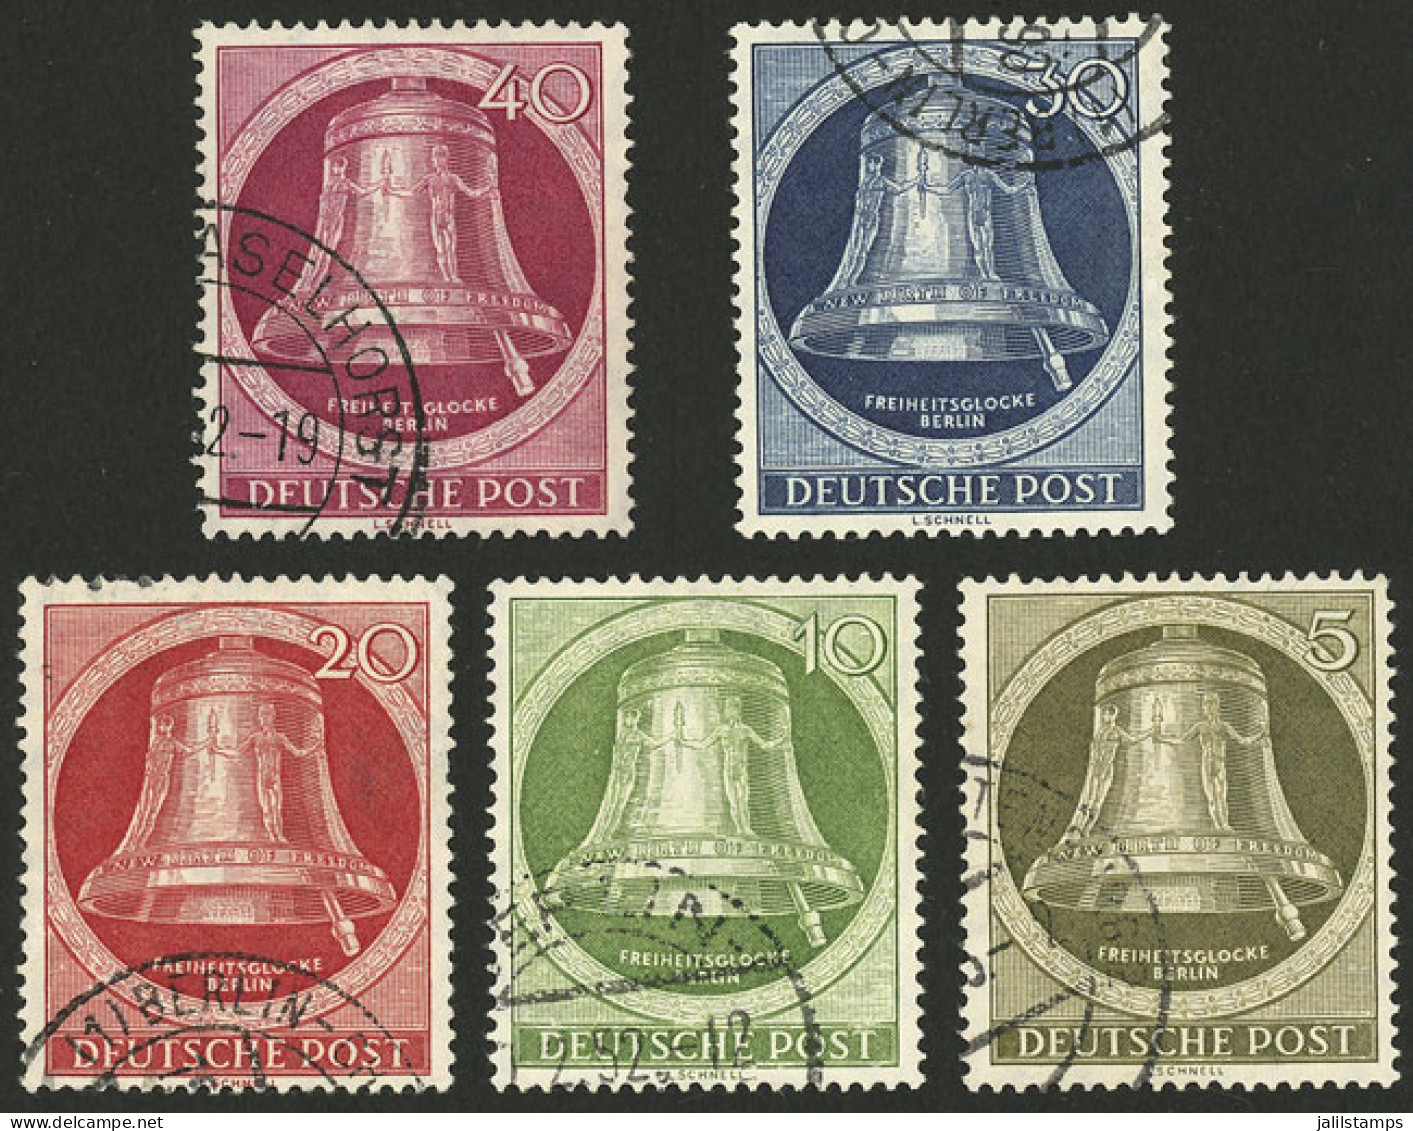 WEST GERMANY - BERLIN: Yvert 68/72, 1952 Bell With Clapper At Right, Set Of 5 Used Values, VF Quality! - Gebraucht